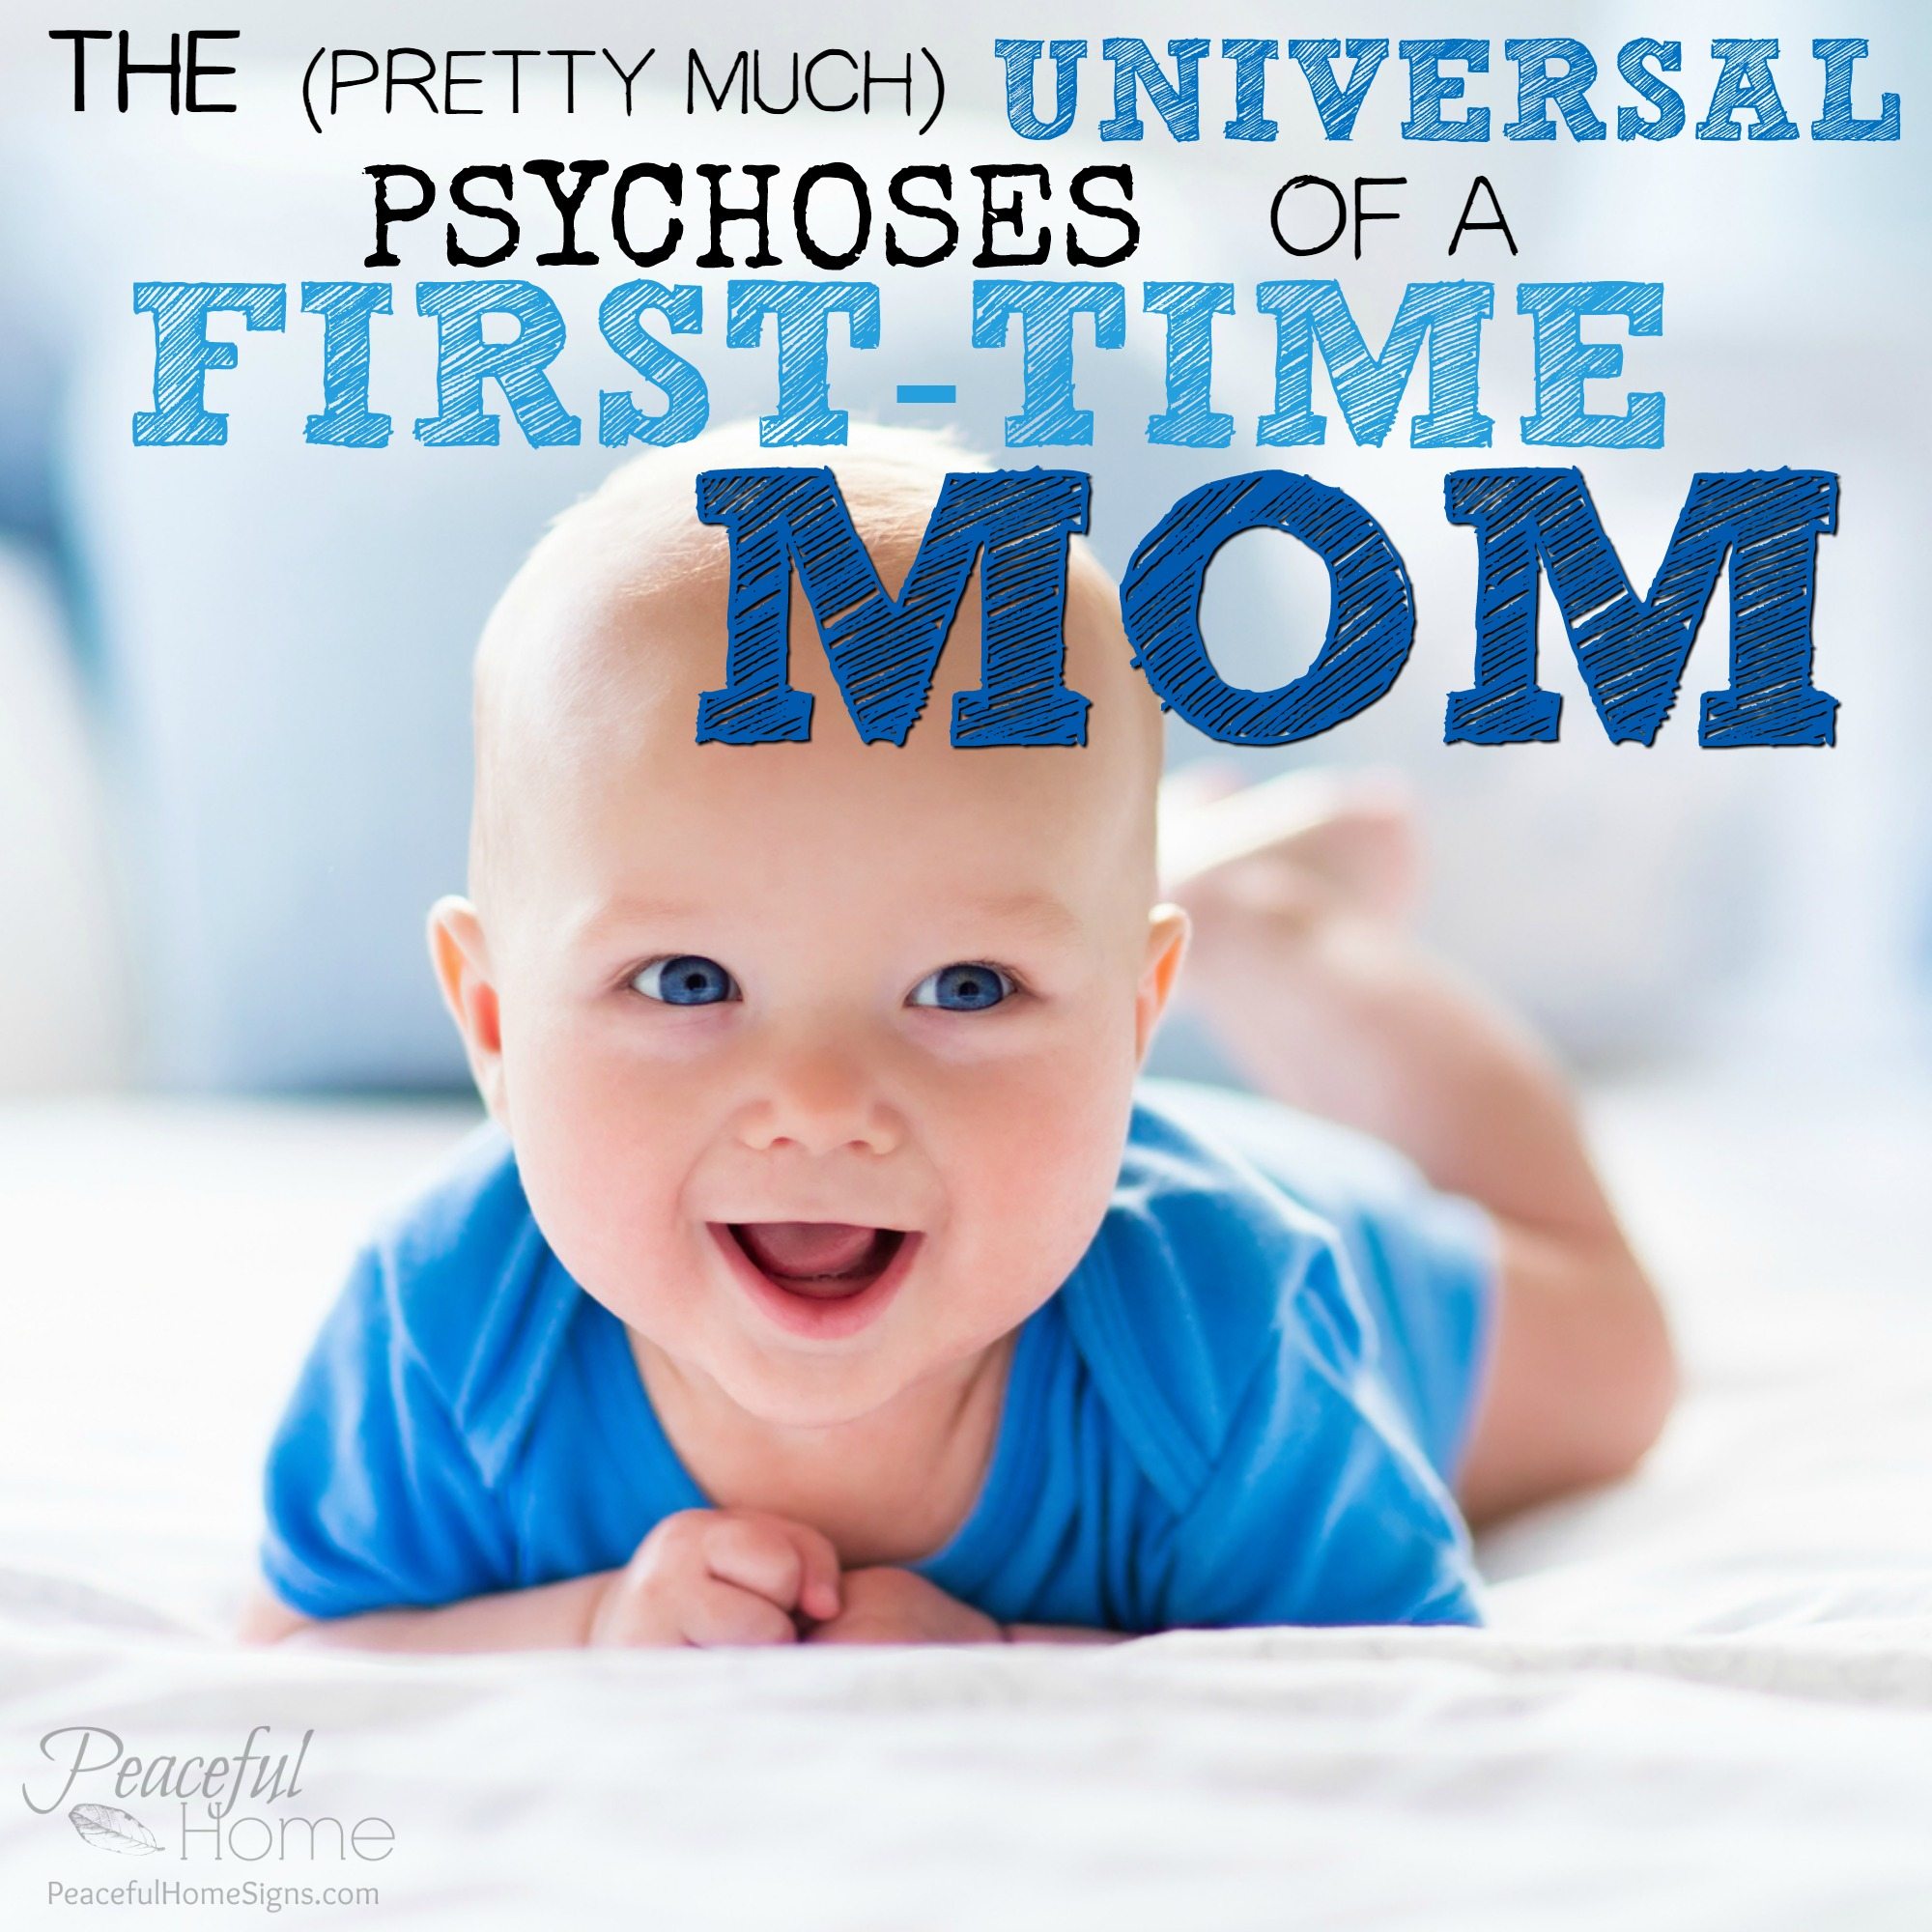 The (pretty much) Universal Psychoses of a First-Time Mom